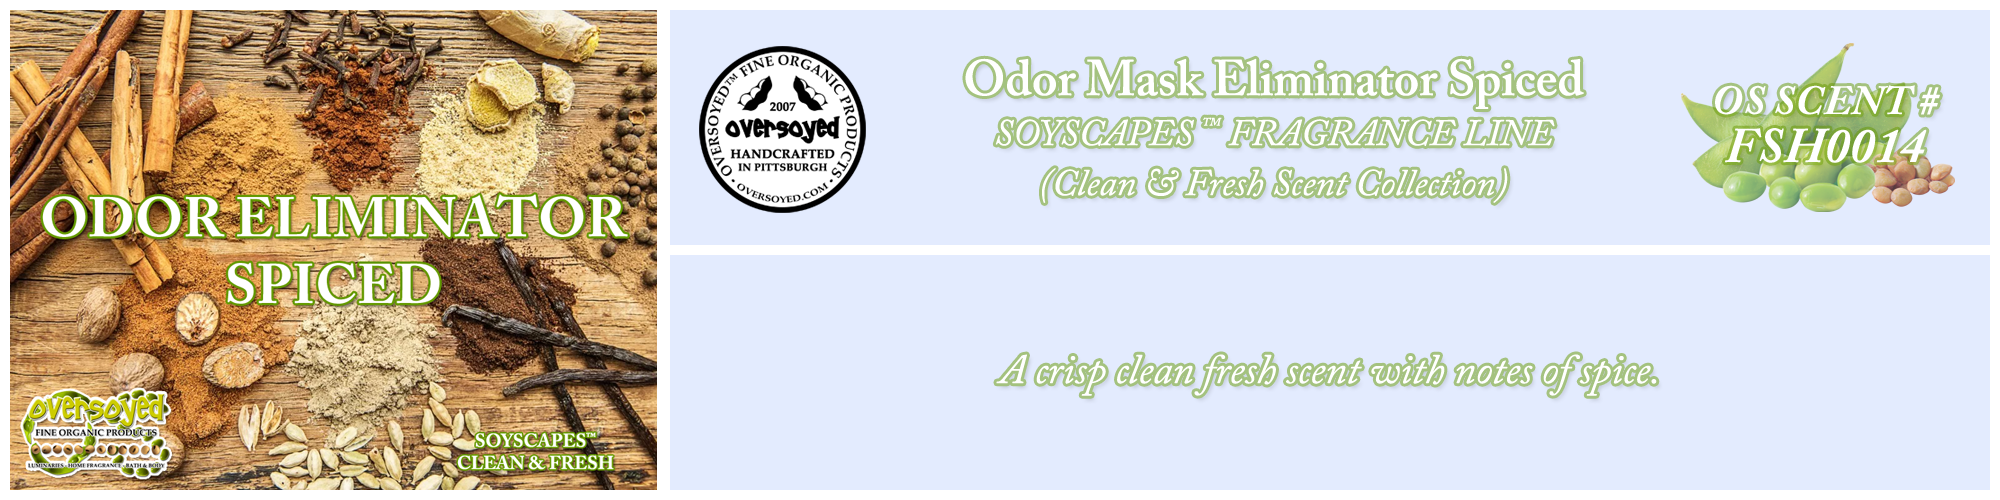 Odor Mask Eliminator Spiced Handcrafted Products Collection